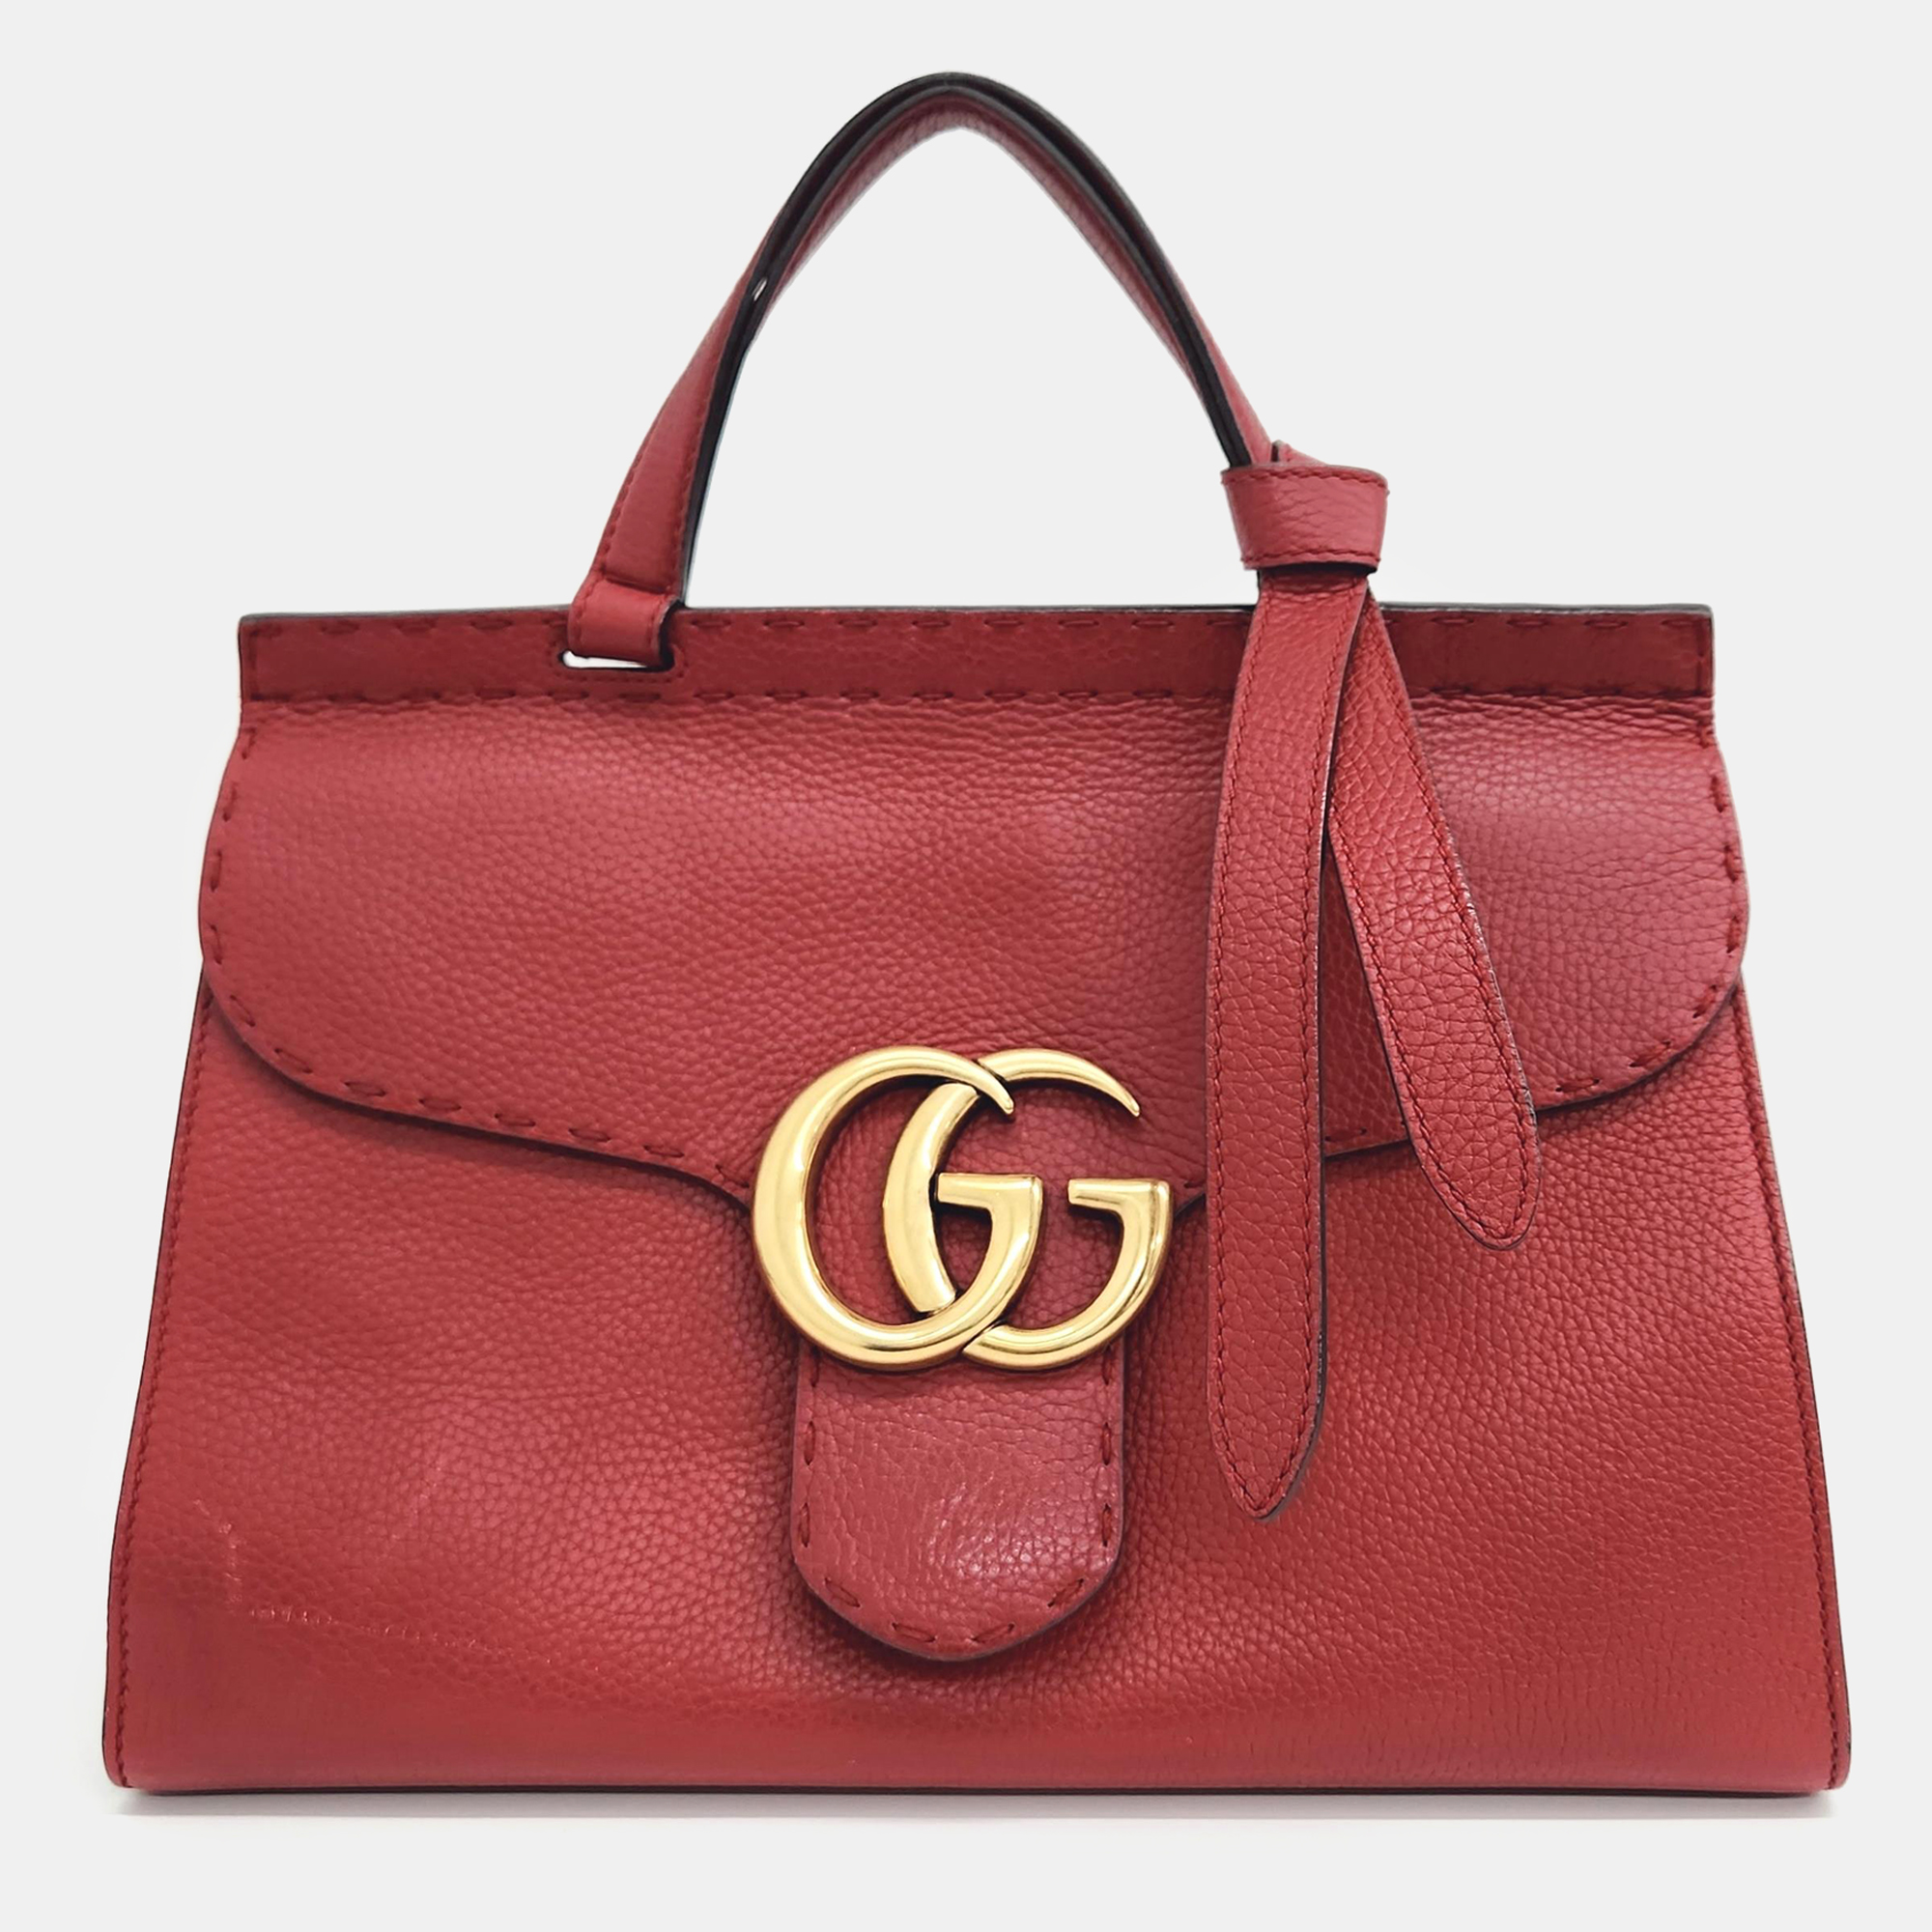 Gucci red leather gg marmont tote bag